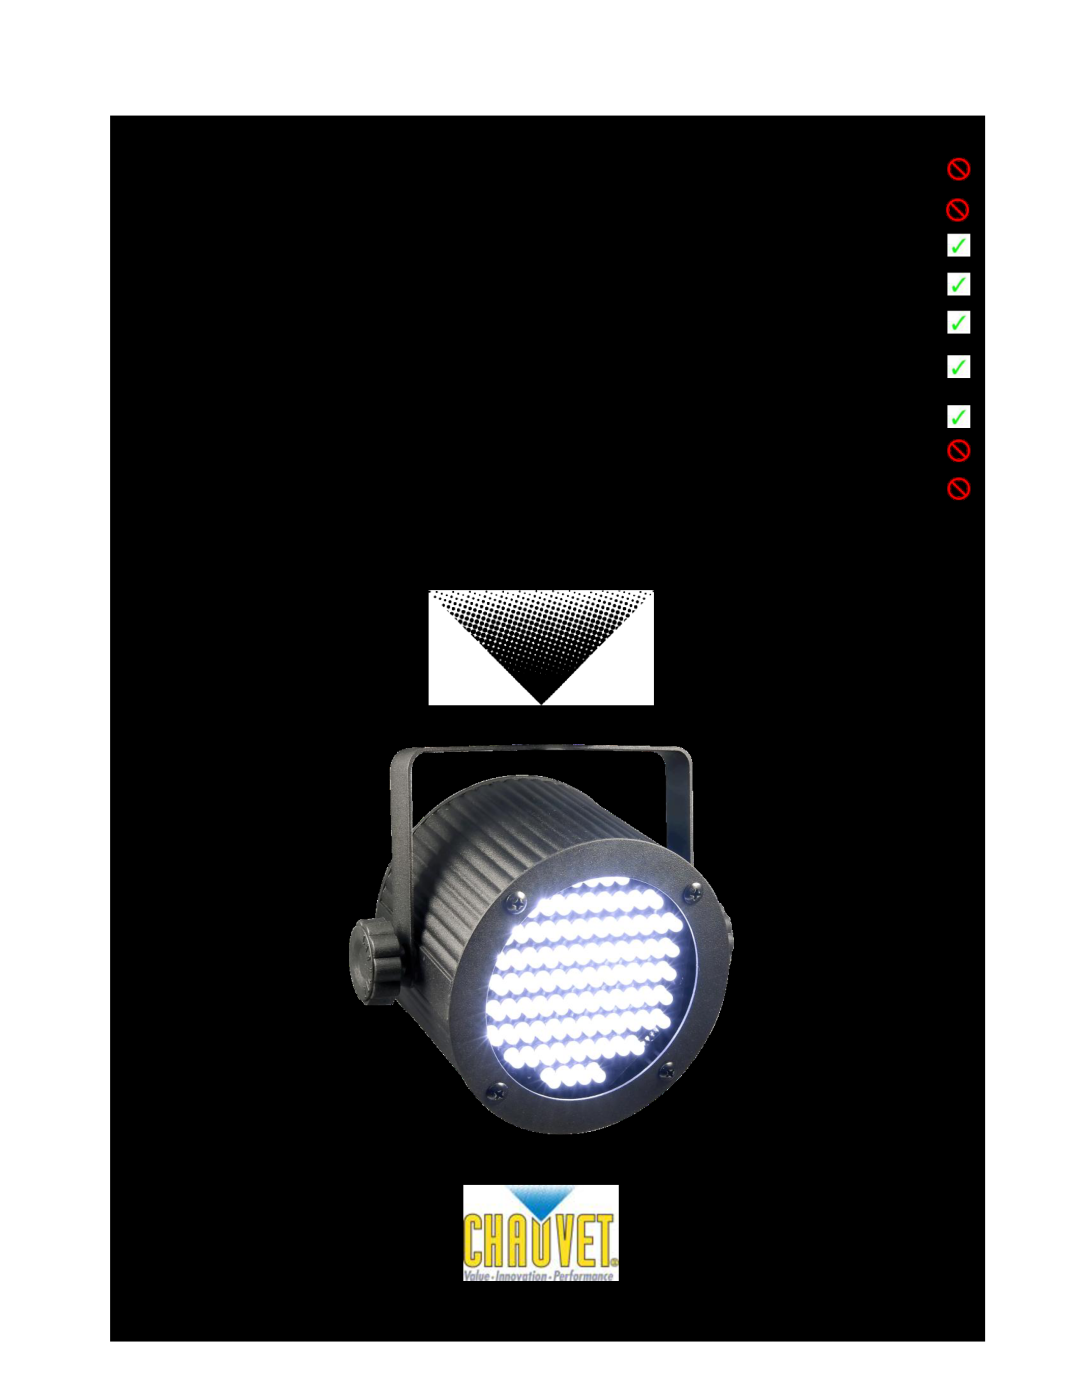 Chauvet 86 user manual Use on Dimmer Outdoor Use Sound Activated DMX, Master/Slave Auto-ranging Power Supply, Snapshot 